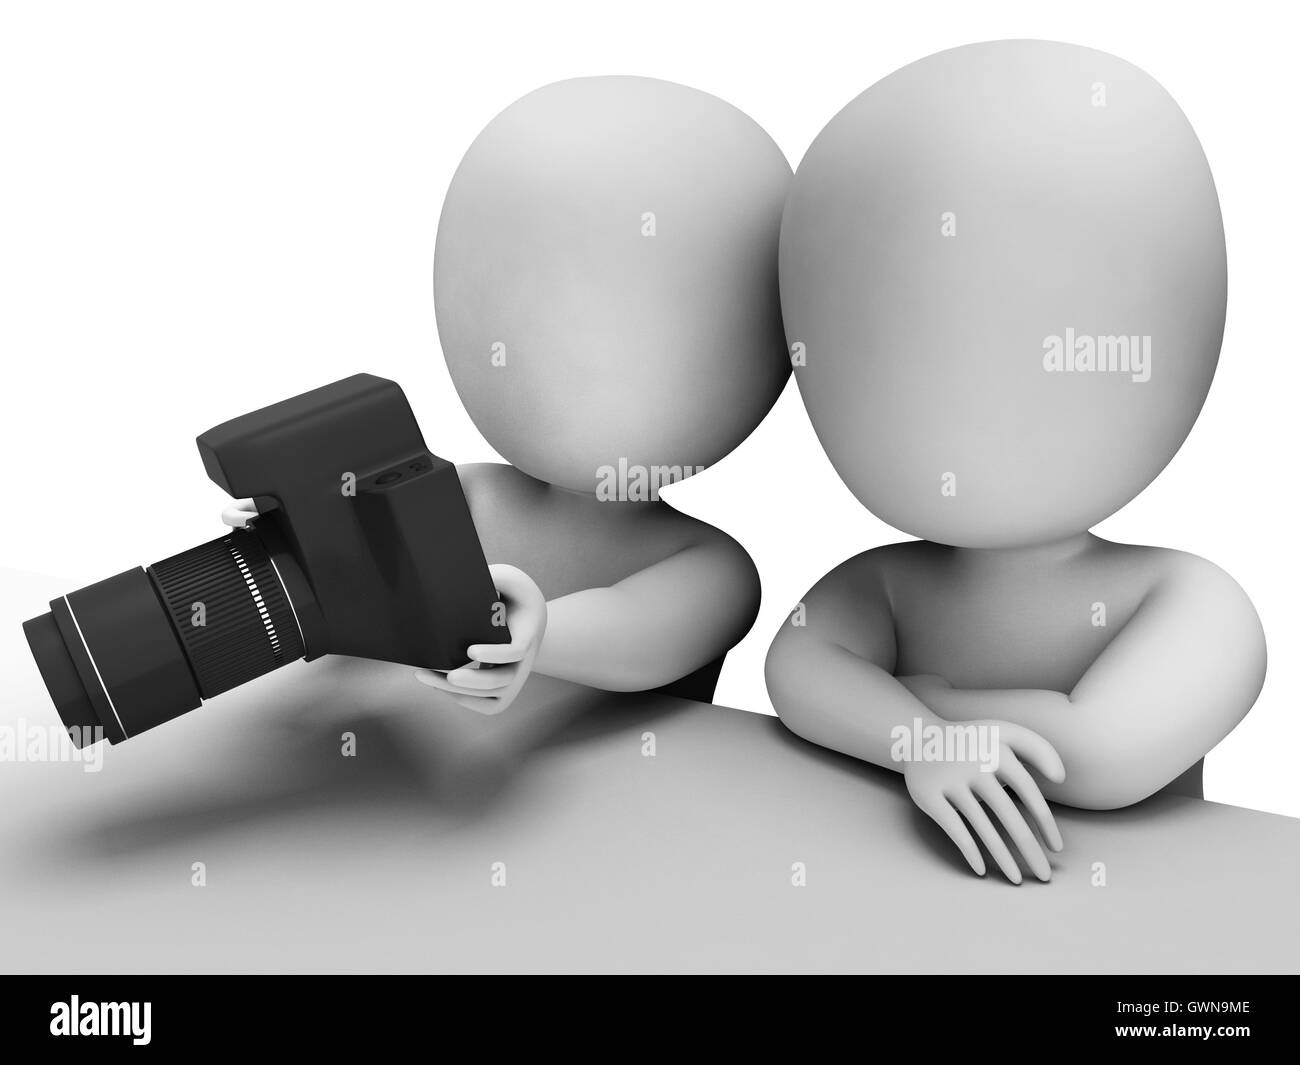 3d Characters Reviewing Images On Dslr Digital Camera Stock Photo